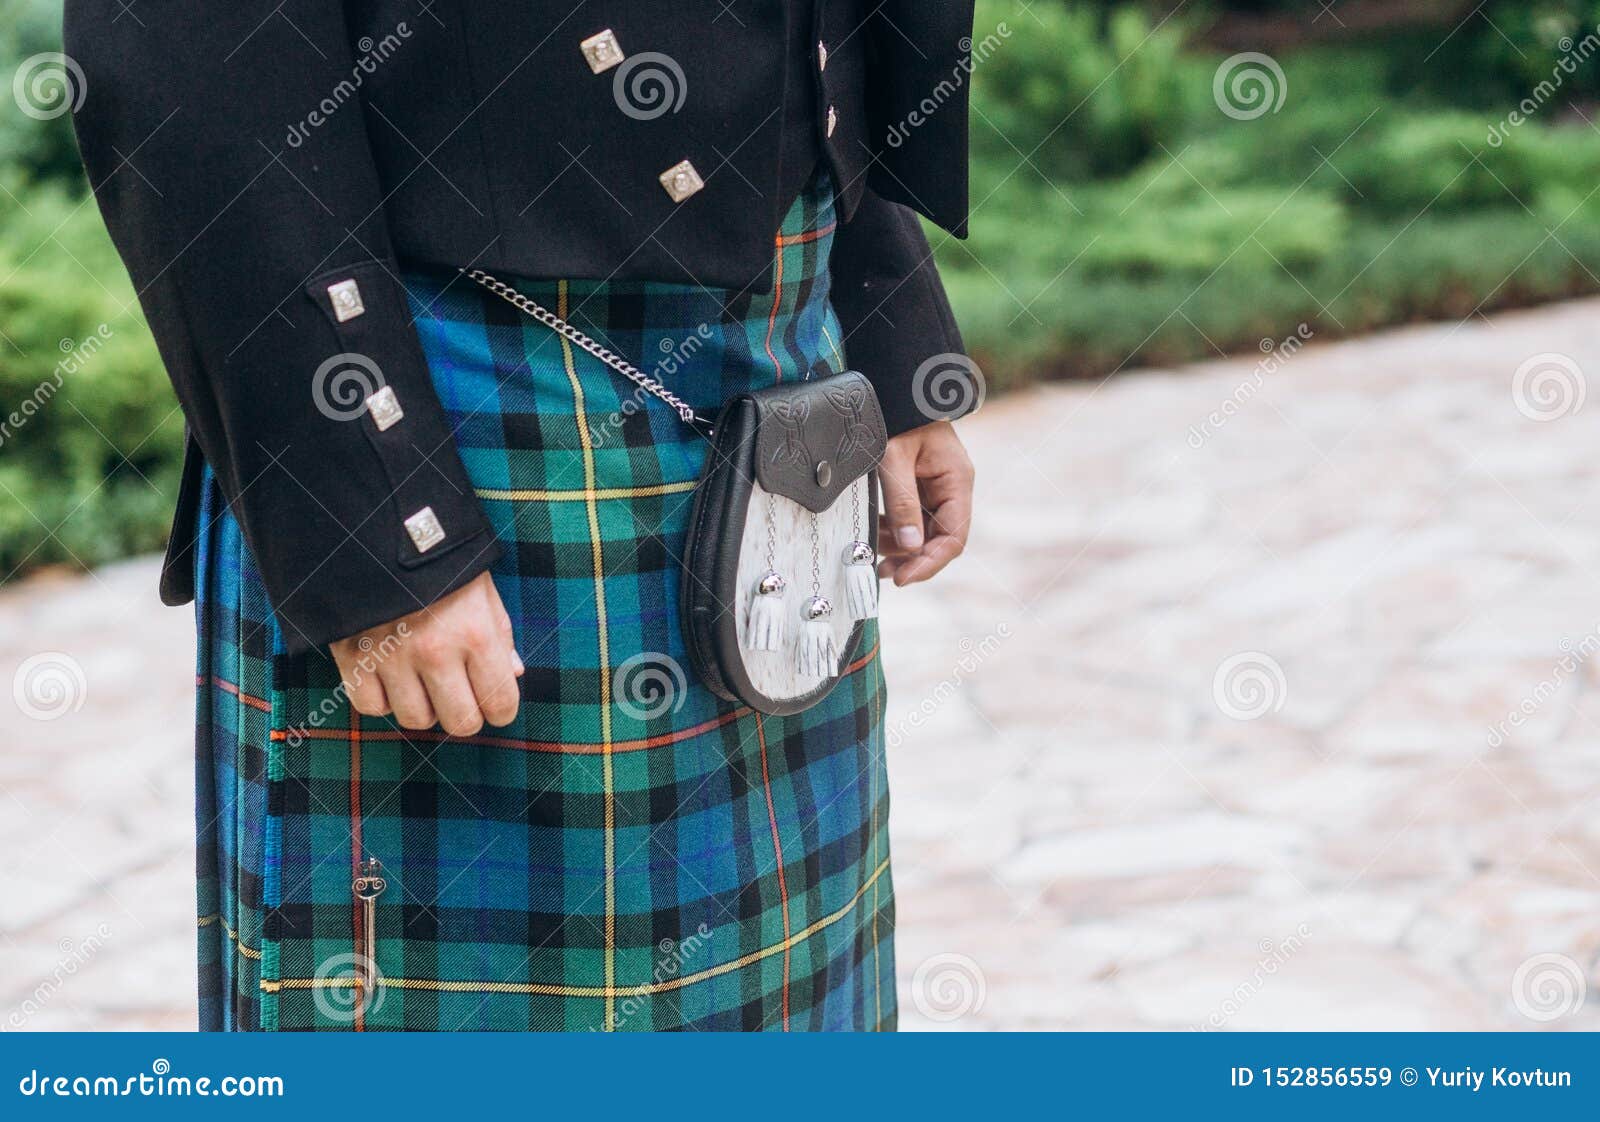 Scottish Kilt Men Traditional Clothing Accessories Stock Image - Image of clothing, classic: 152856559